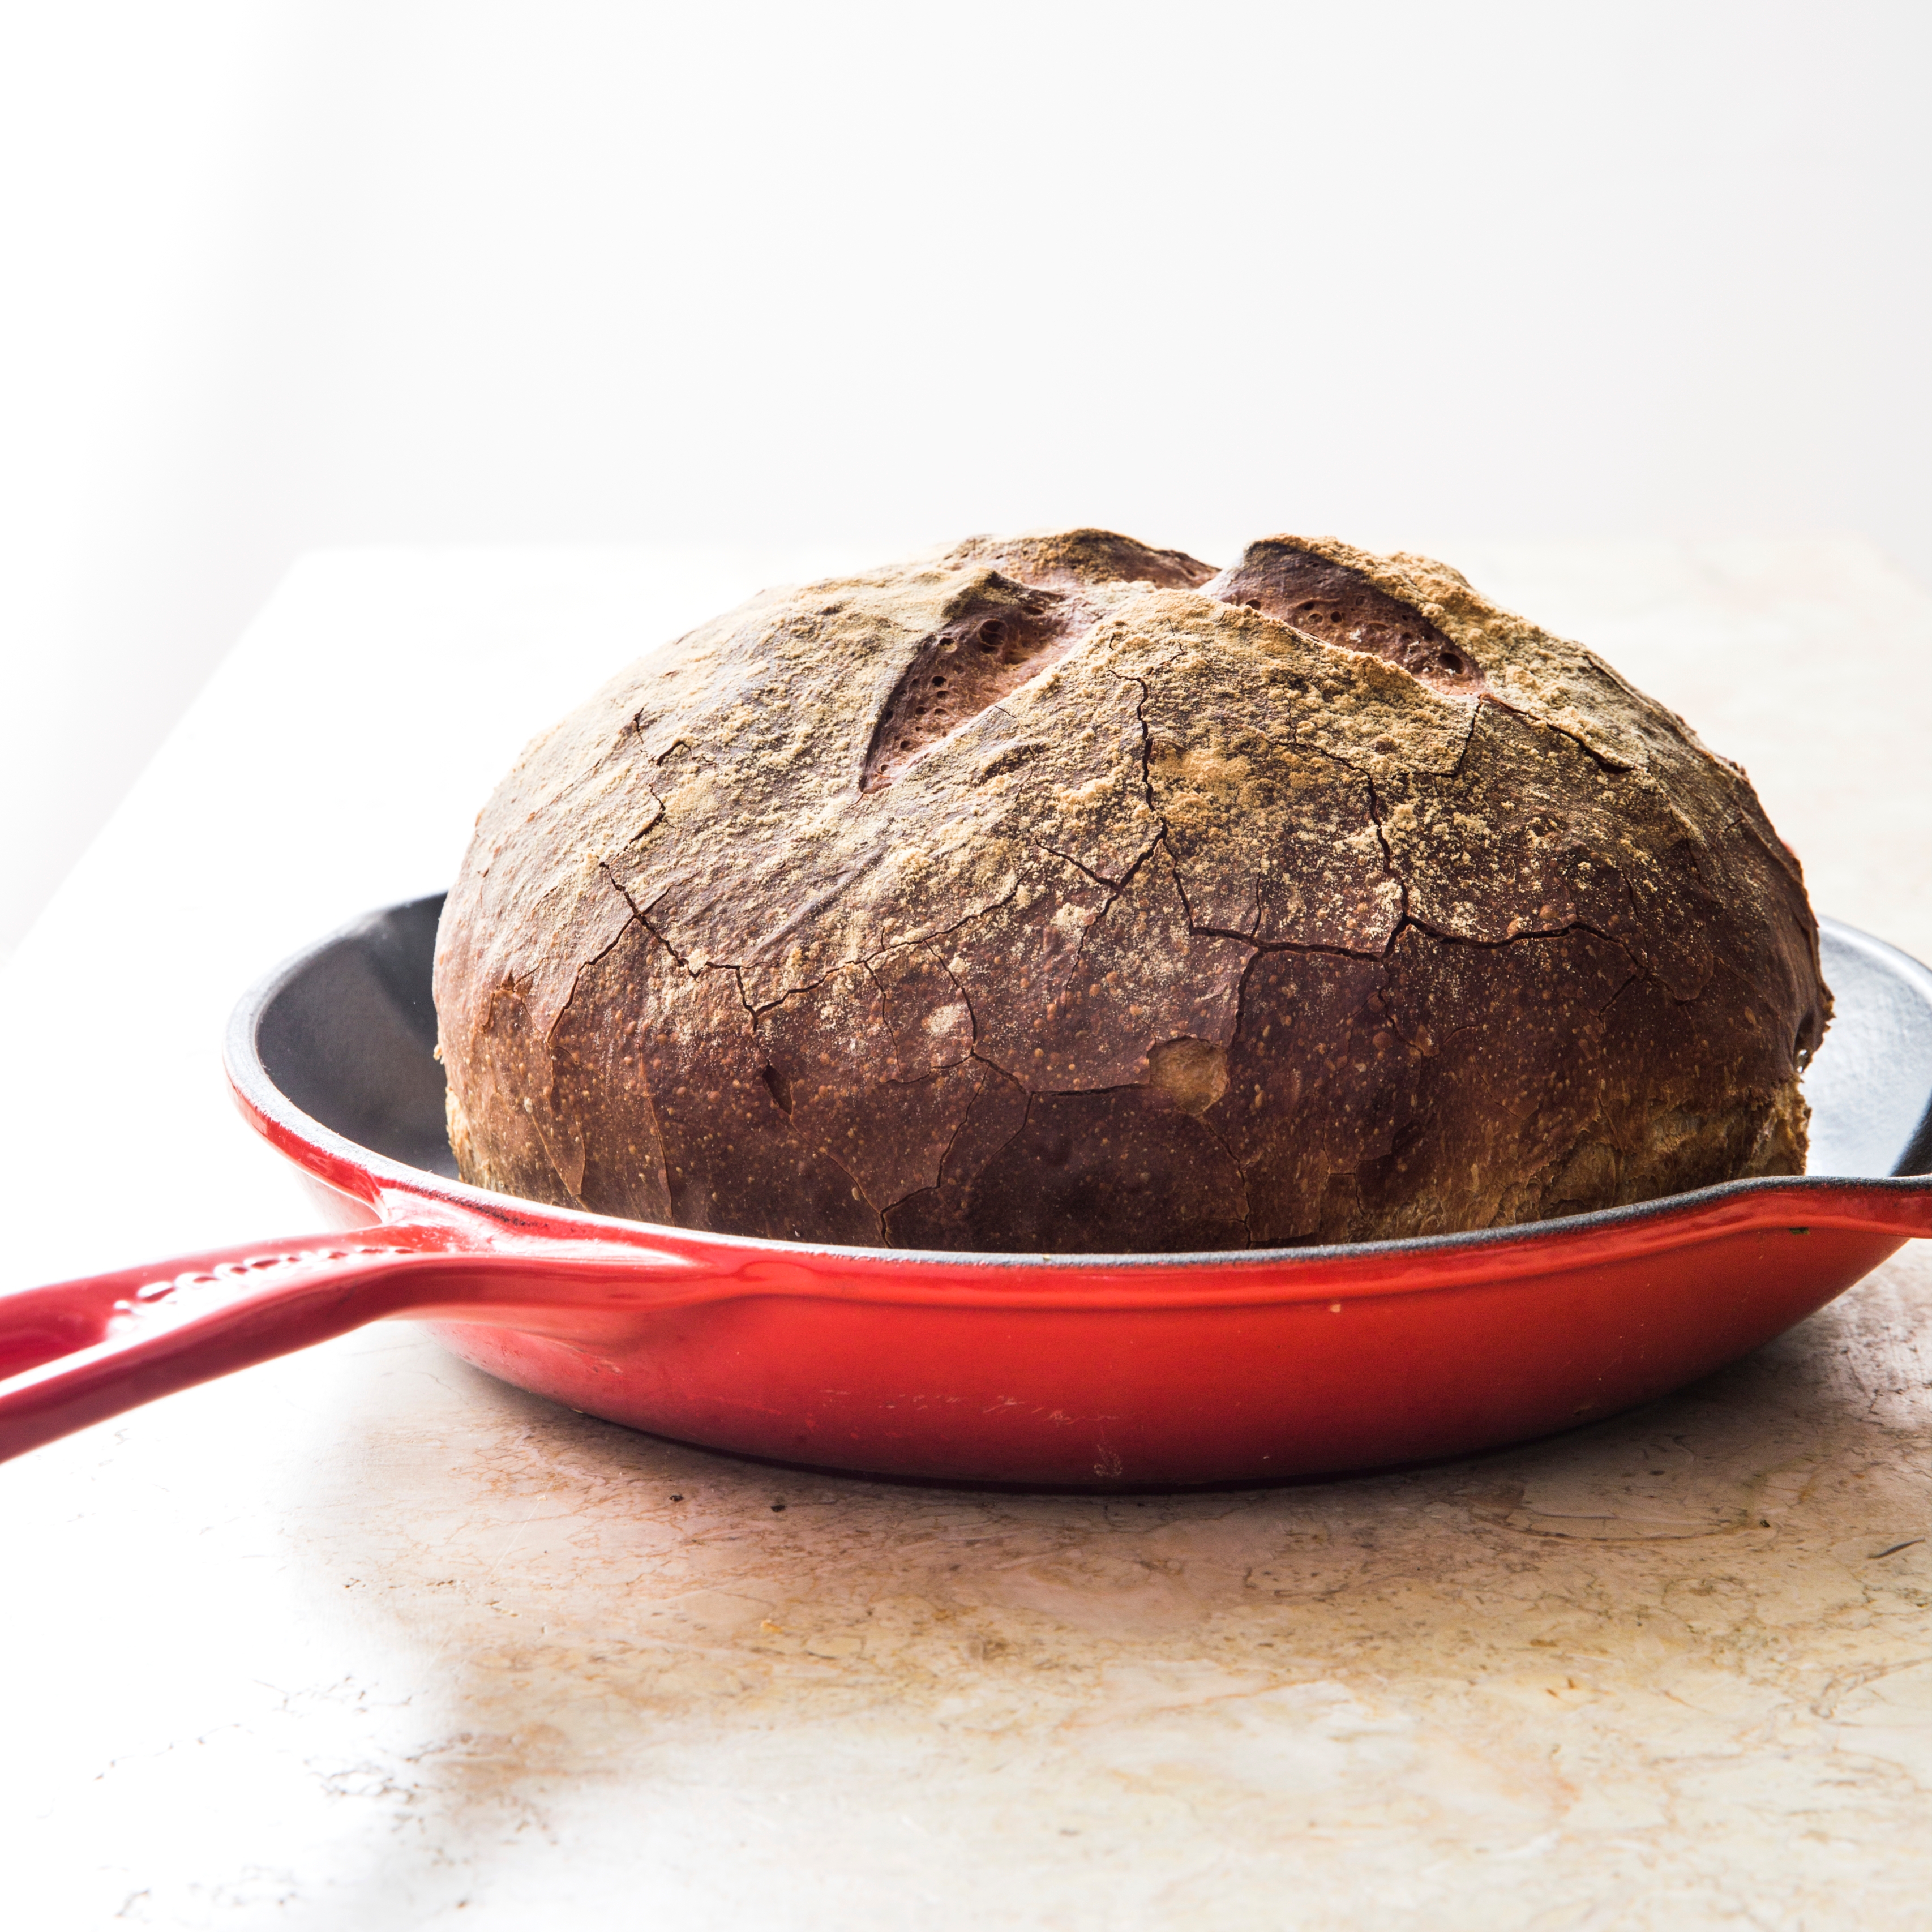 Rustic Bread Baked in a Cast Iron Skillet - 1840 Farm